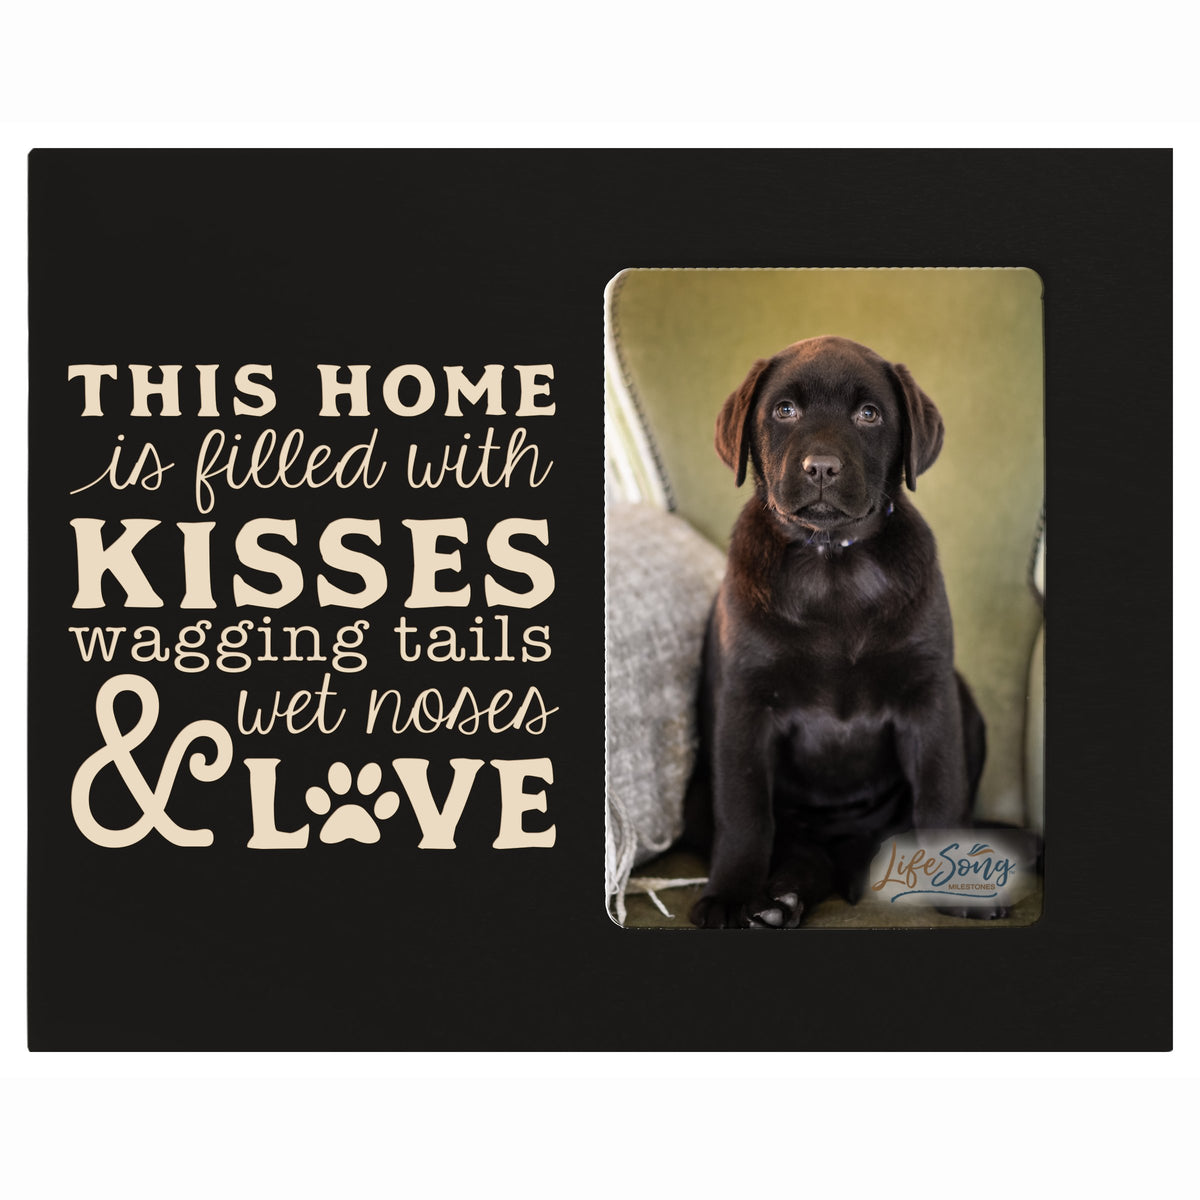 LifeSong Milestones Engraved Pet Vertical Photo Frame Gift Ideas for Black Lab &amp; Dog Lovers - Golden Lab Owner Frame Gift 8”x10” Holds 4”x6” Photo